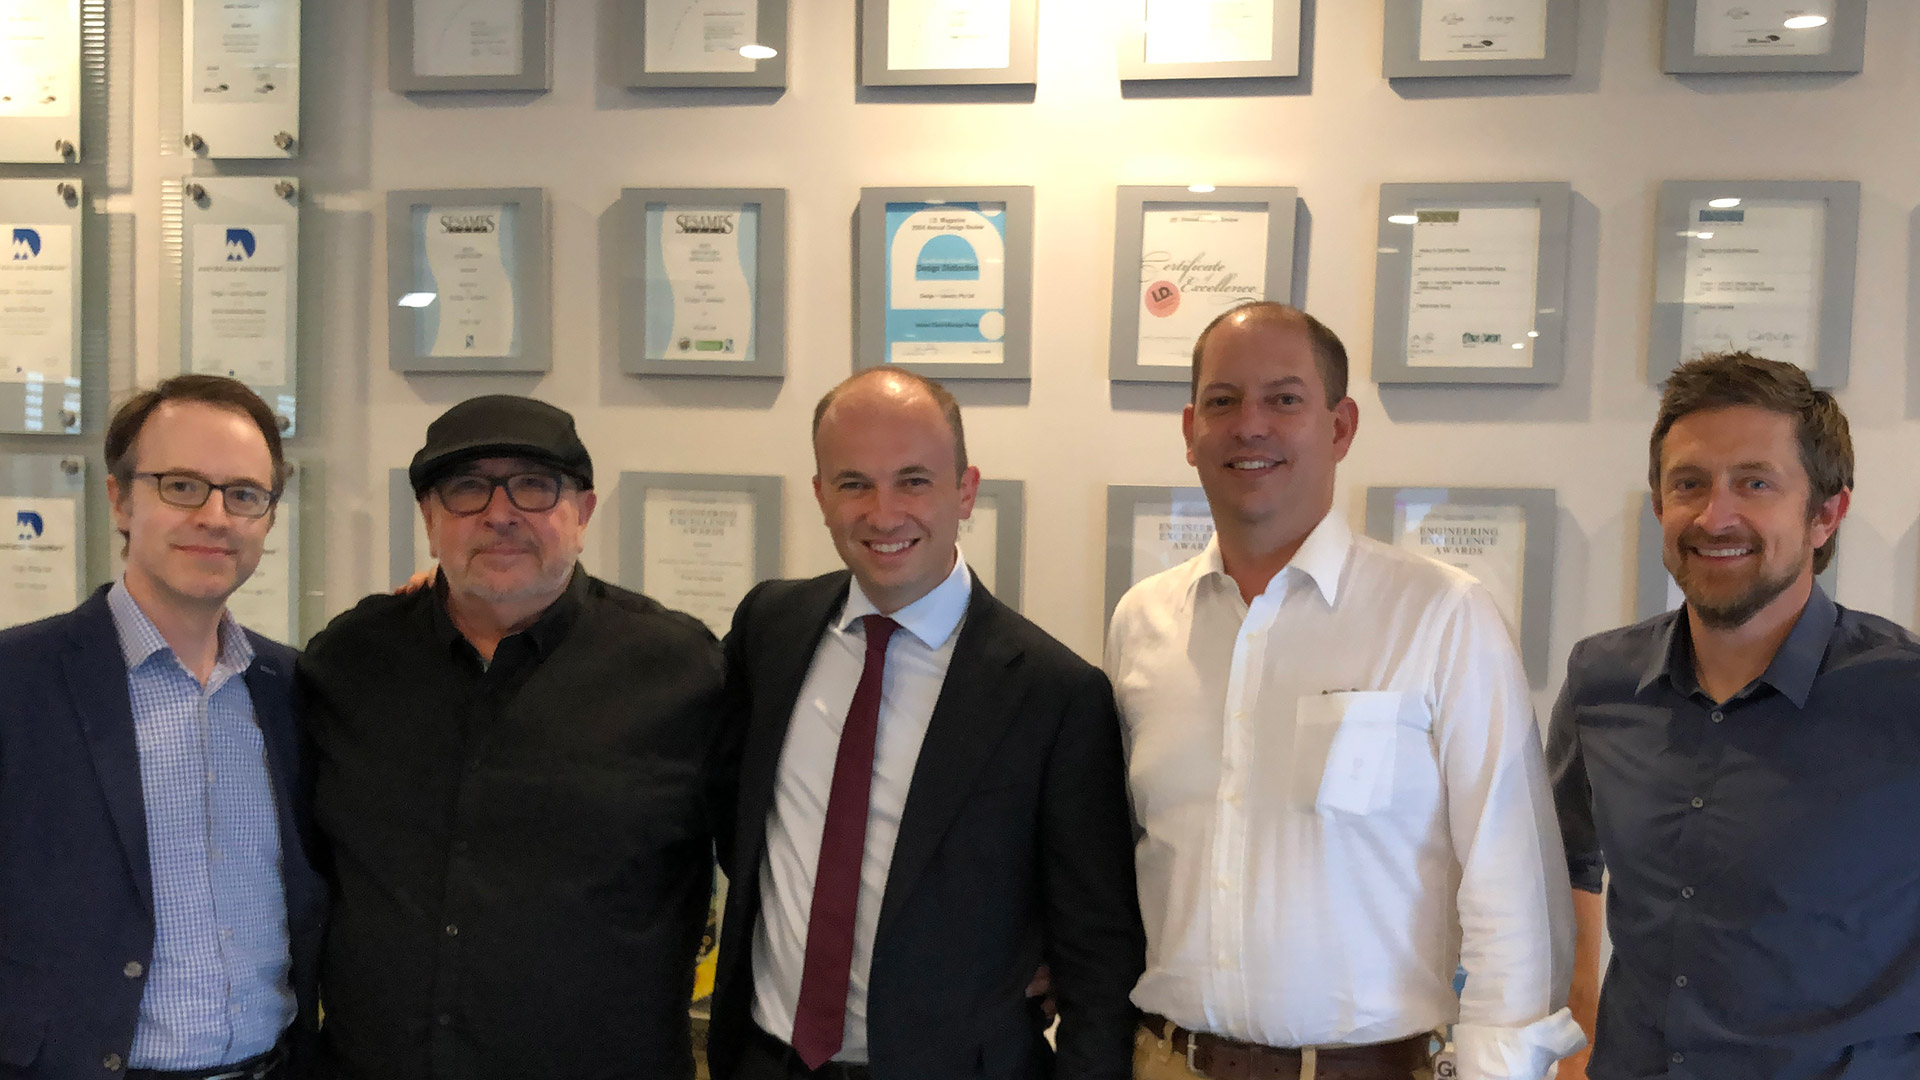  Minister Matt Kean (center) with (from left to right) Anthony Honeyfield, Murray Hunter (Founder of D+I), David Jones (Head of D+I) and Nathan Burke. 